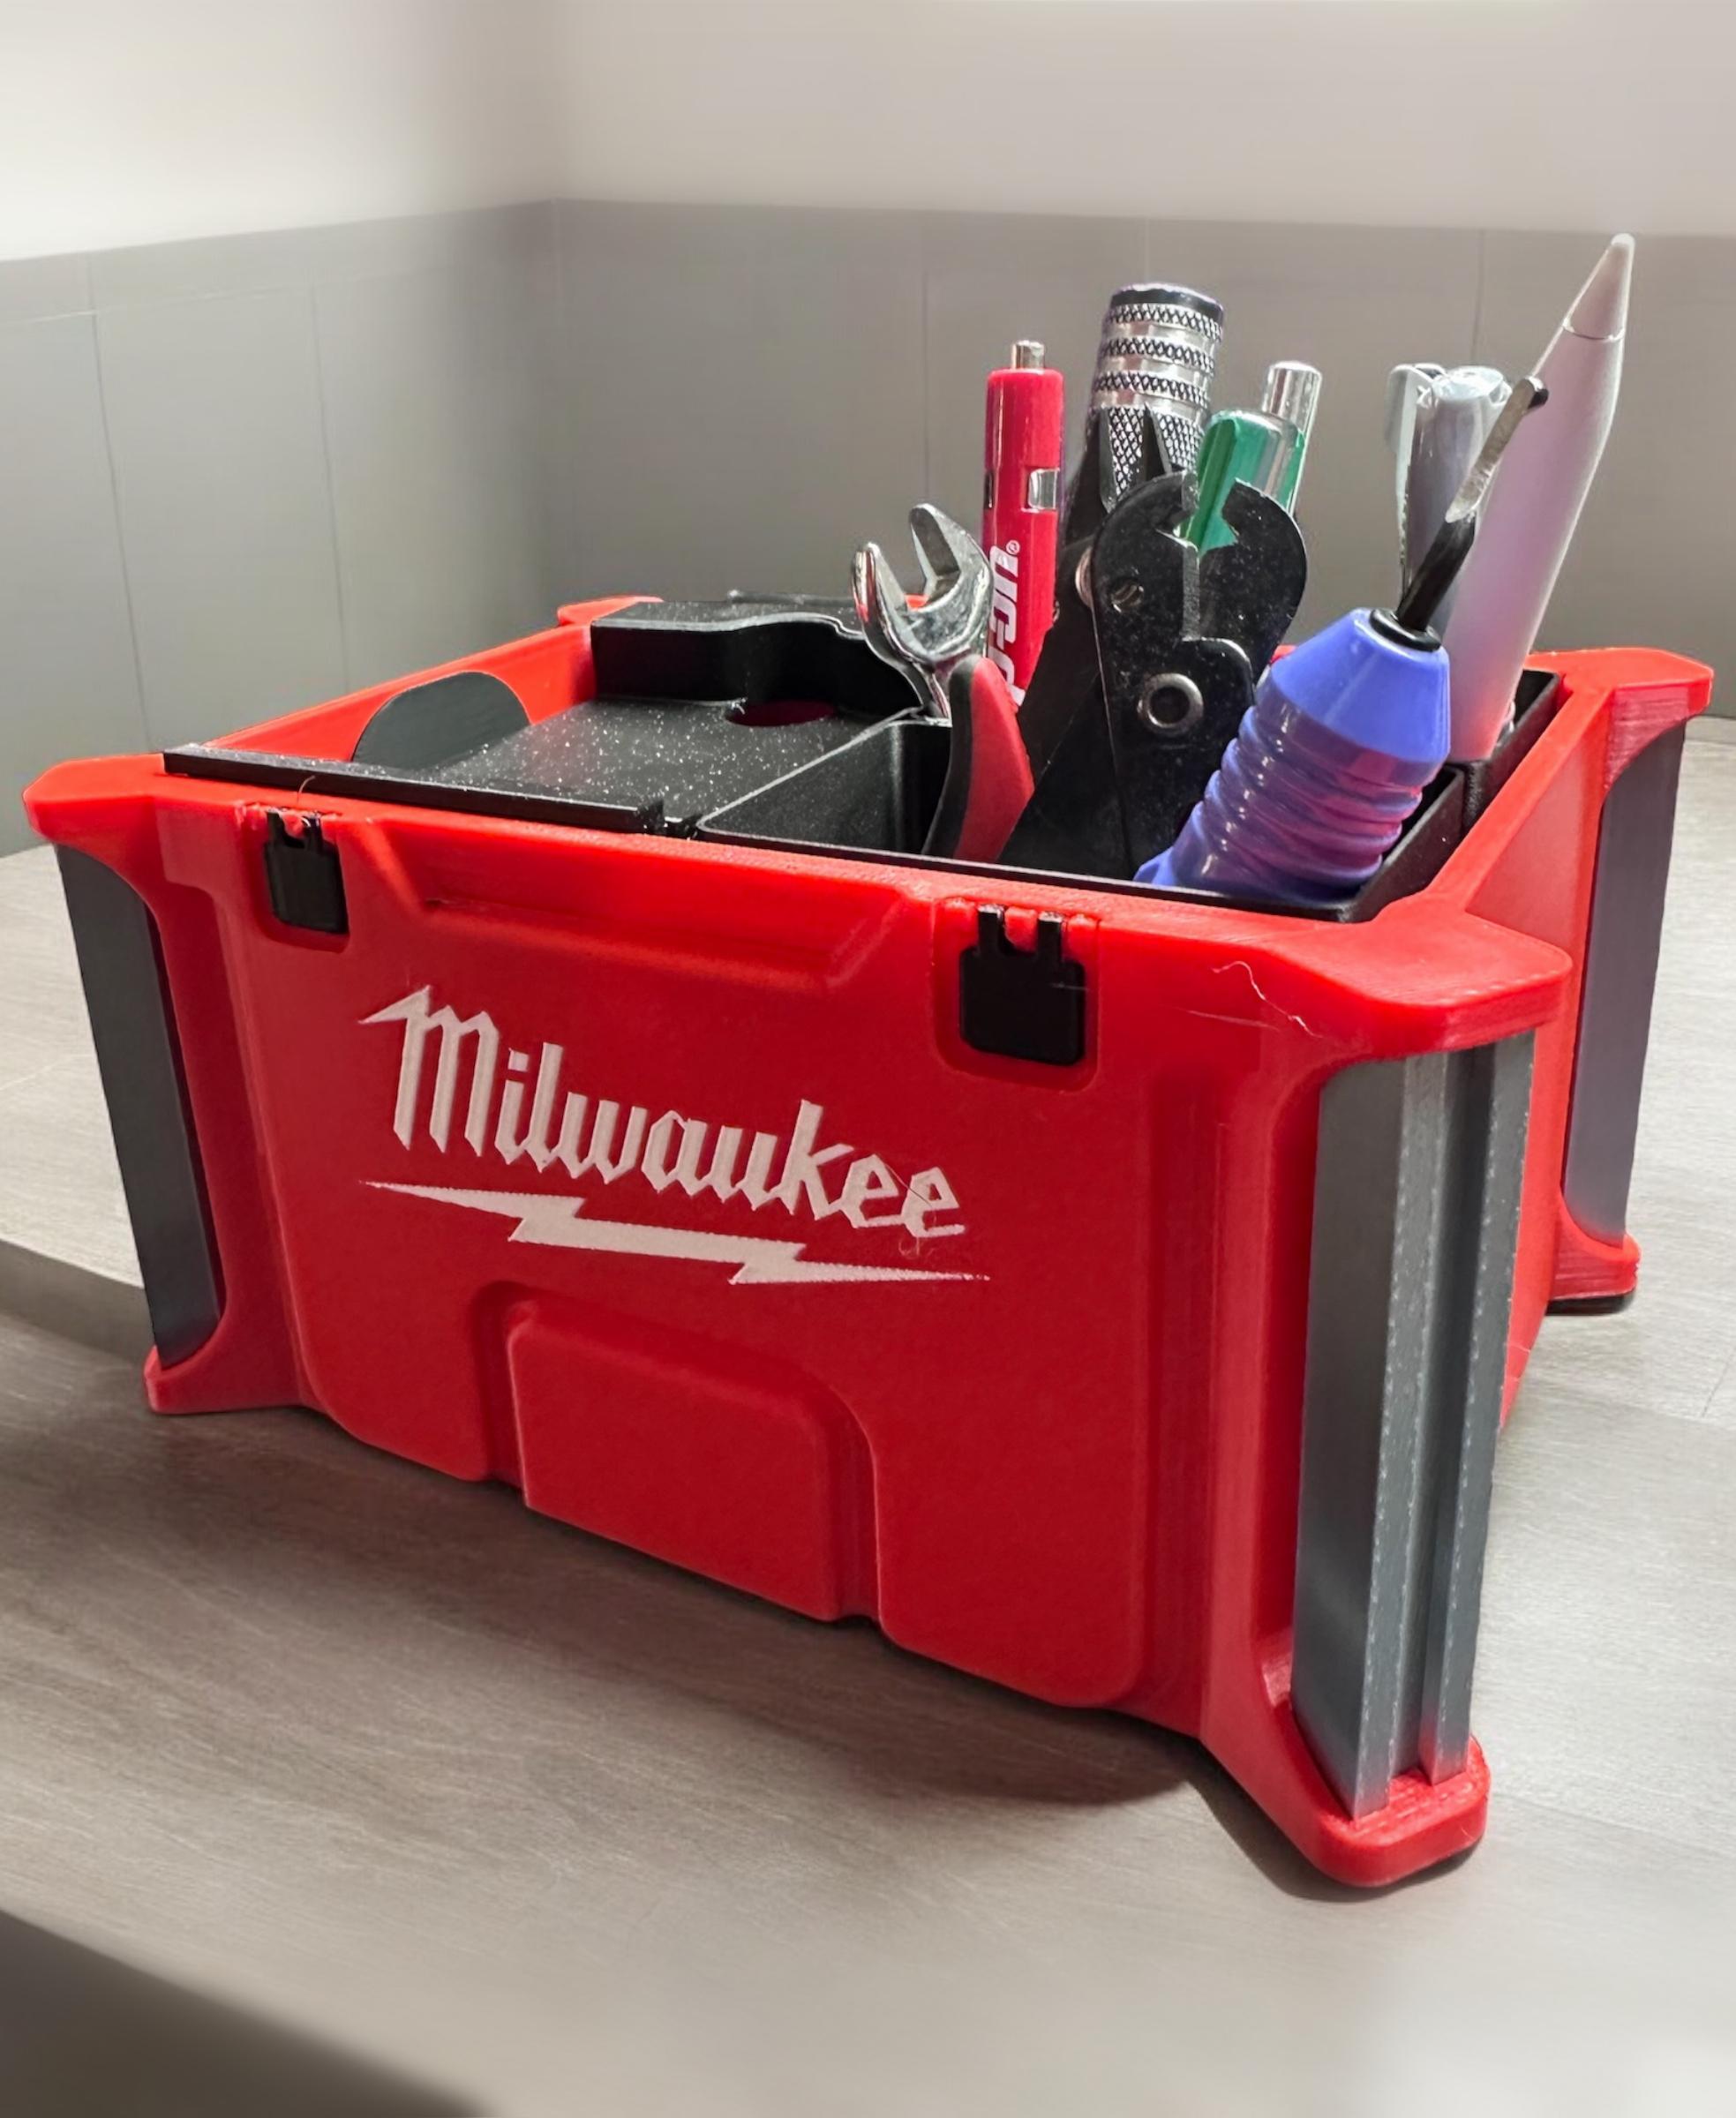 Milwaukee Desk Organizer - Packout style desk organizer with inserts, lid, and single color option 3d model